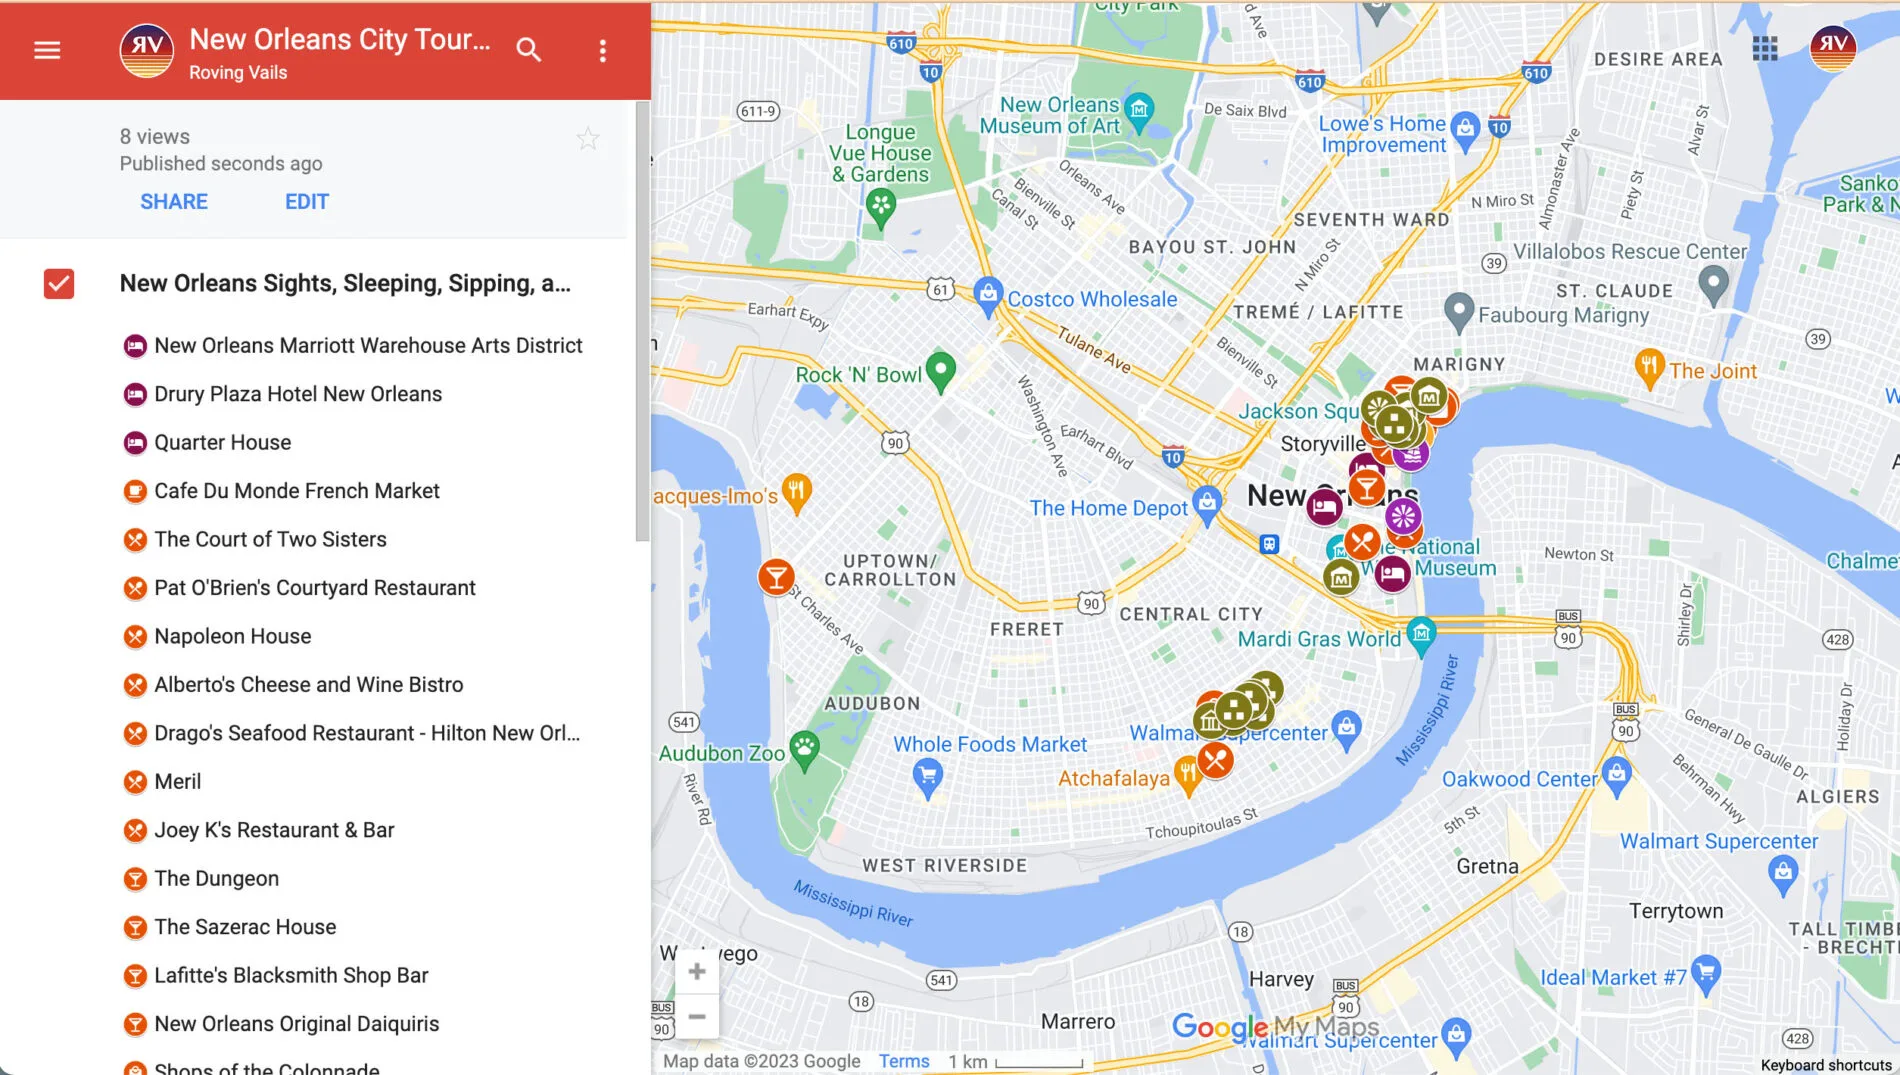 New Orleans tourist map showing recommended places to stay, places to eat, and major sights and attractions.